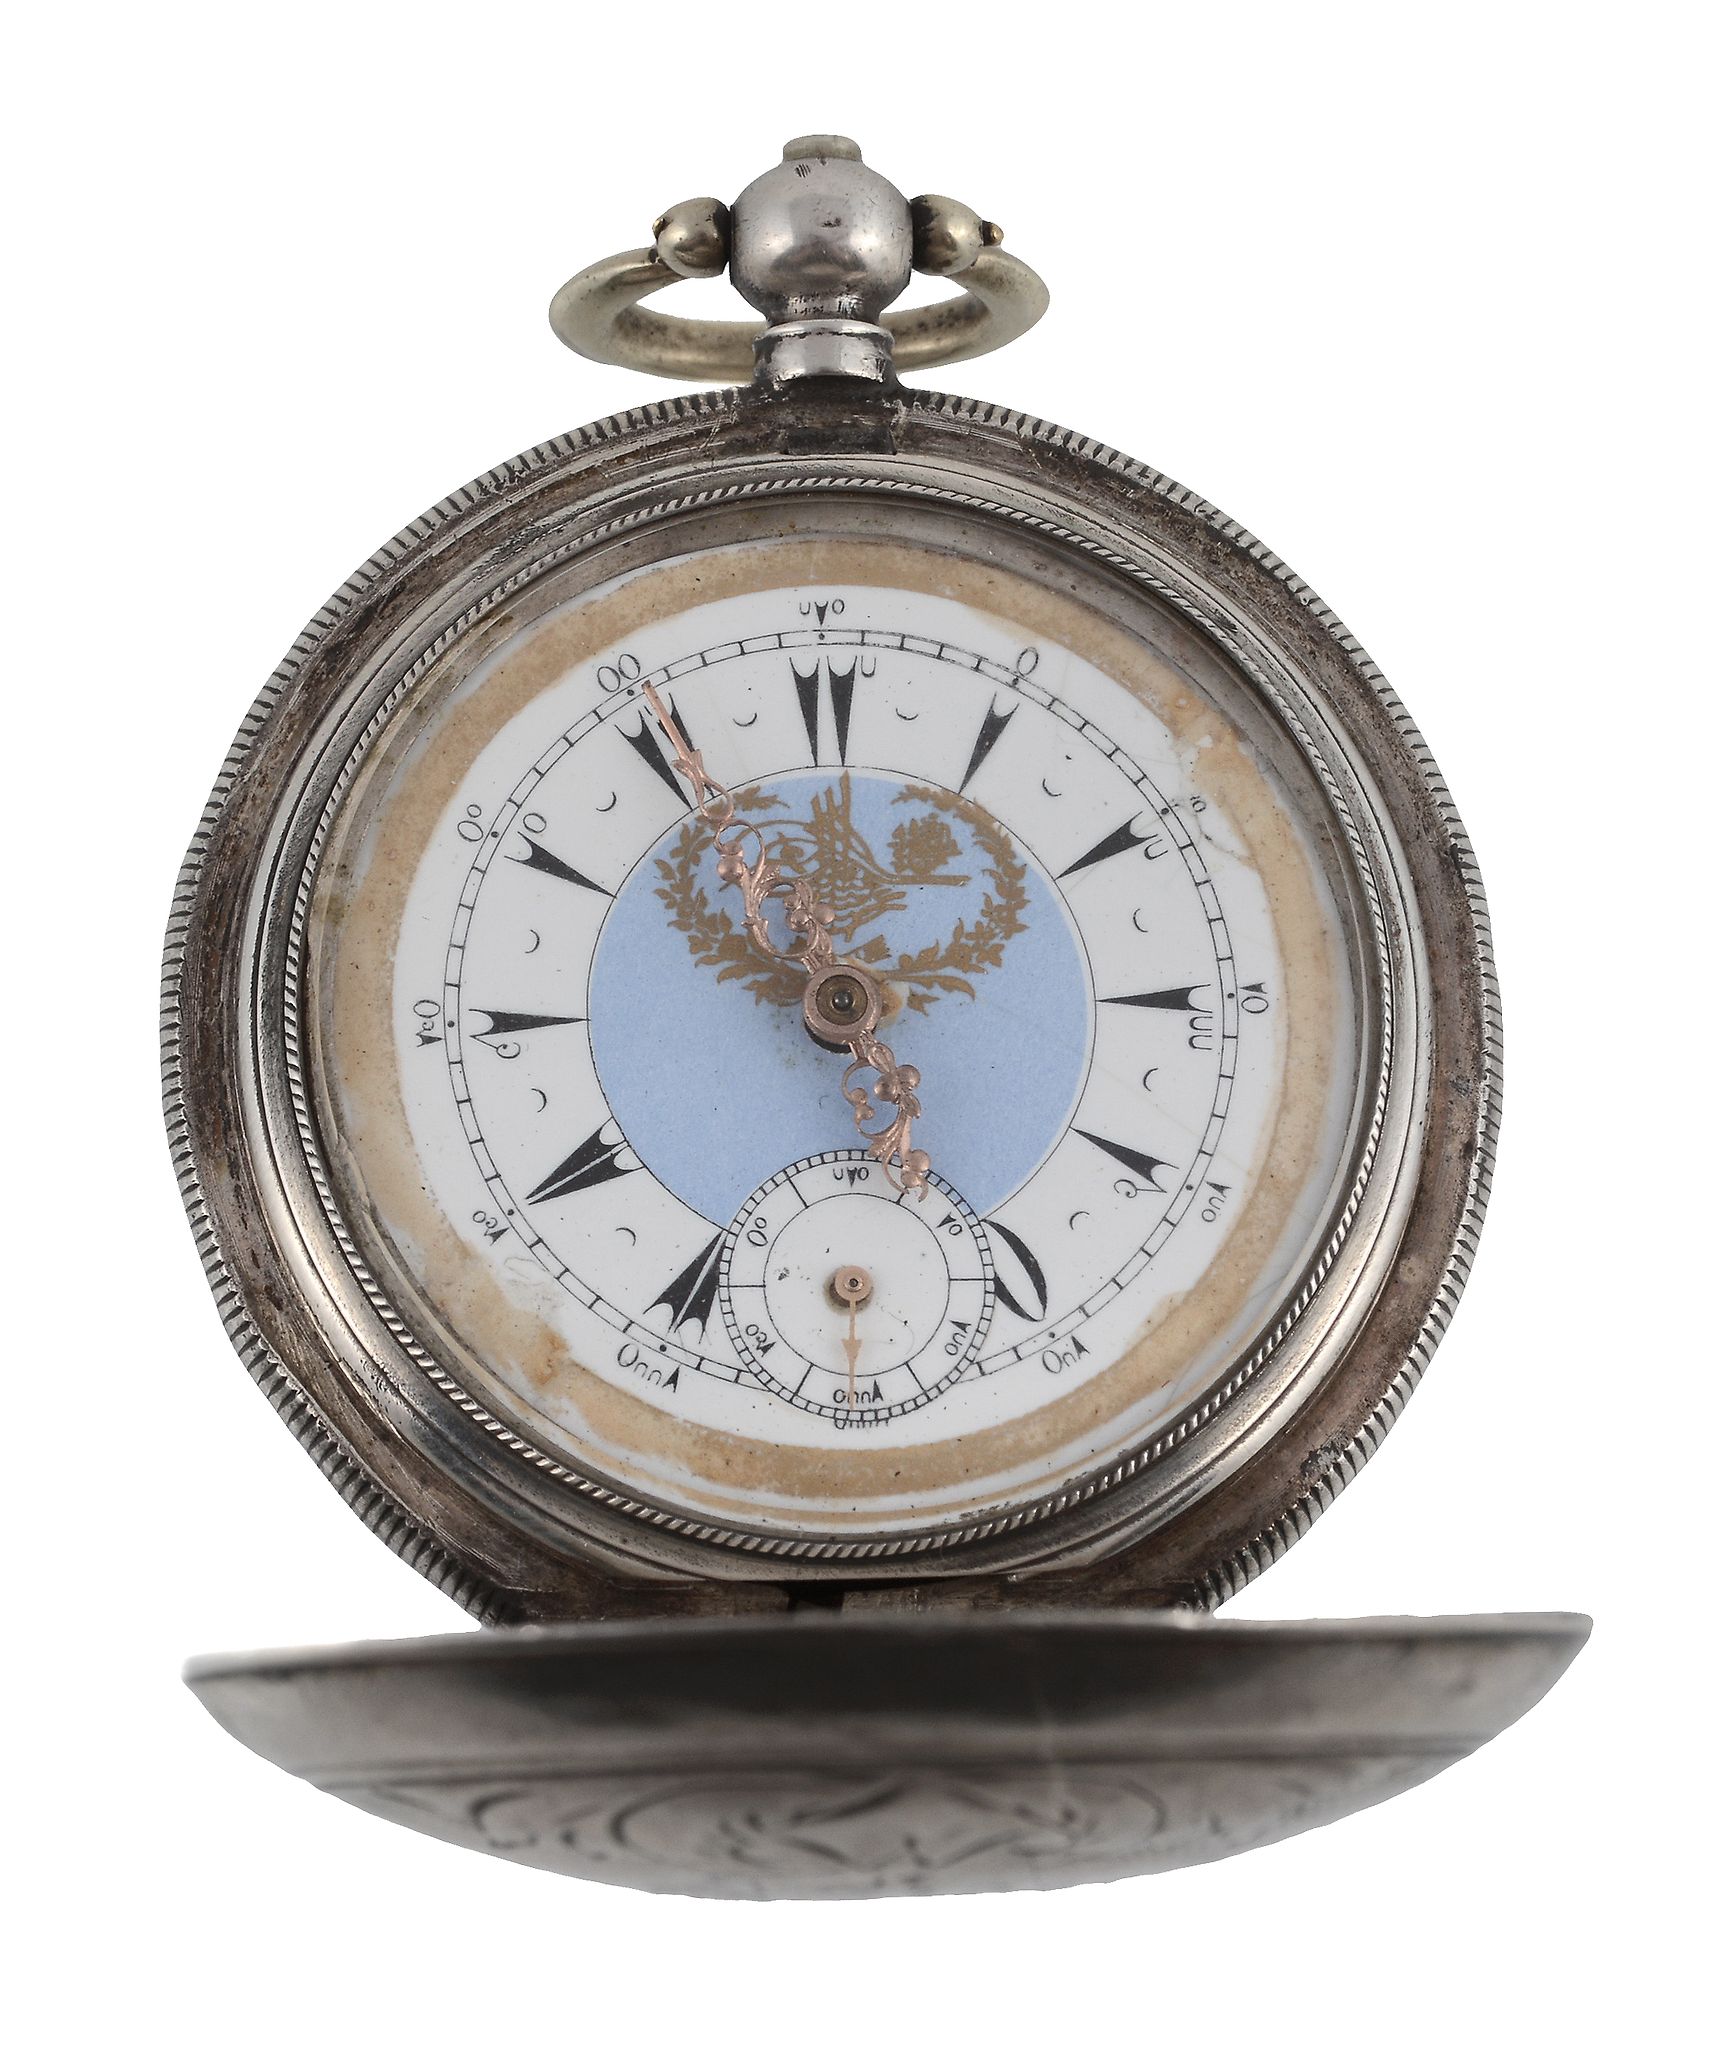 J. Dent, a silver coloured full hunter pocket watch, no. 27598, Swiss straight line club tooth